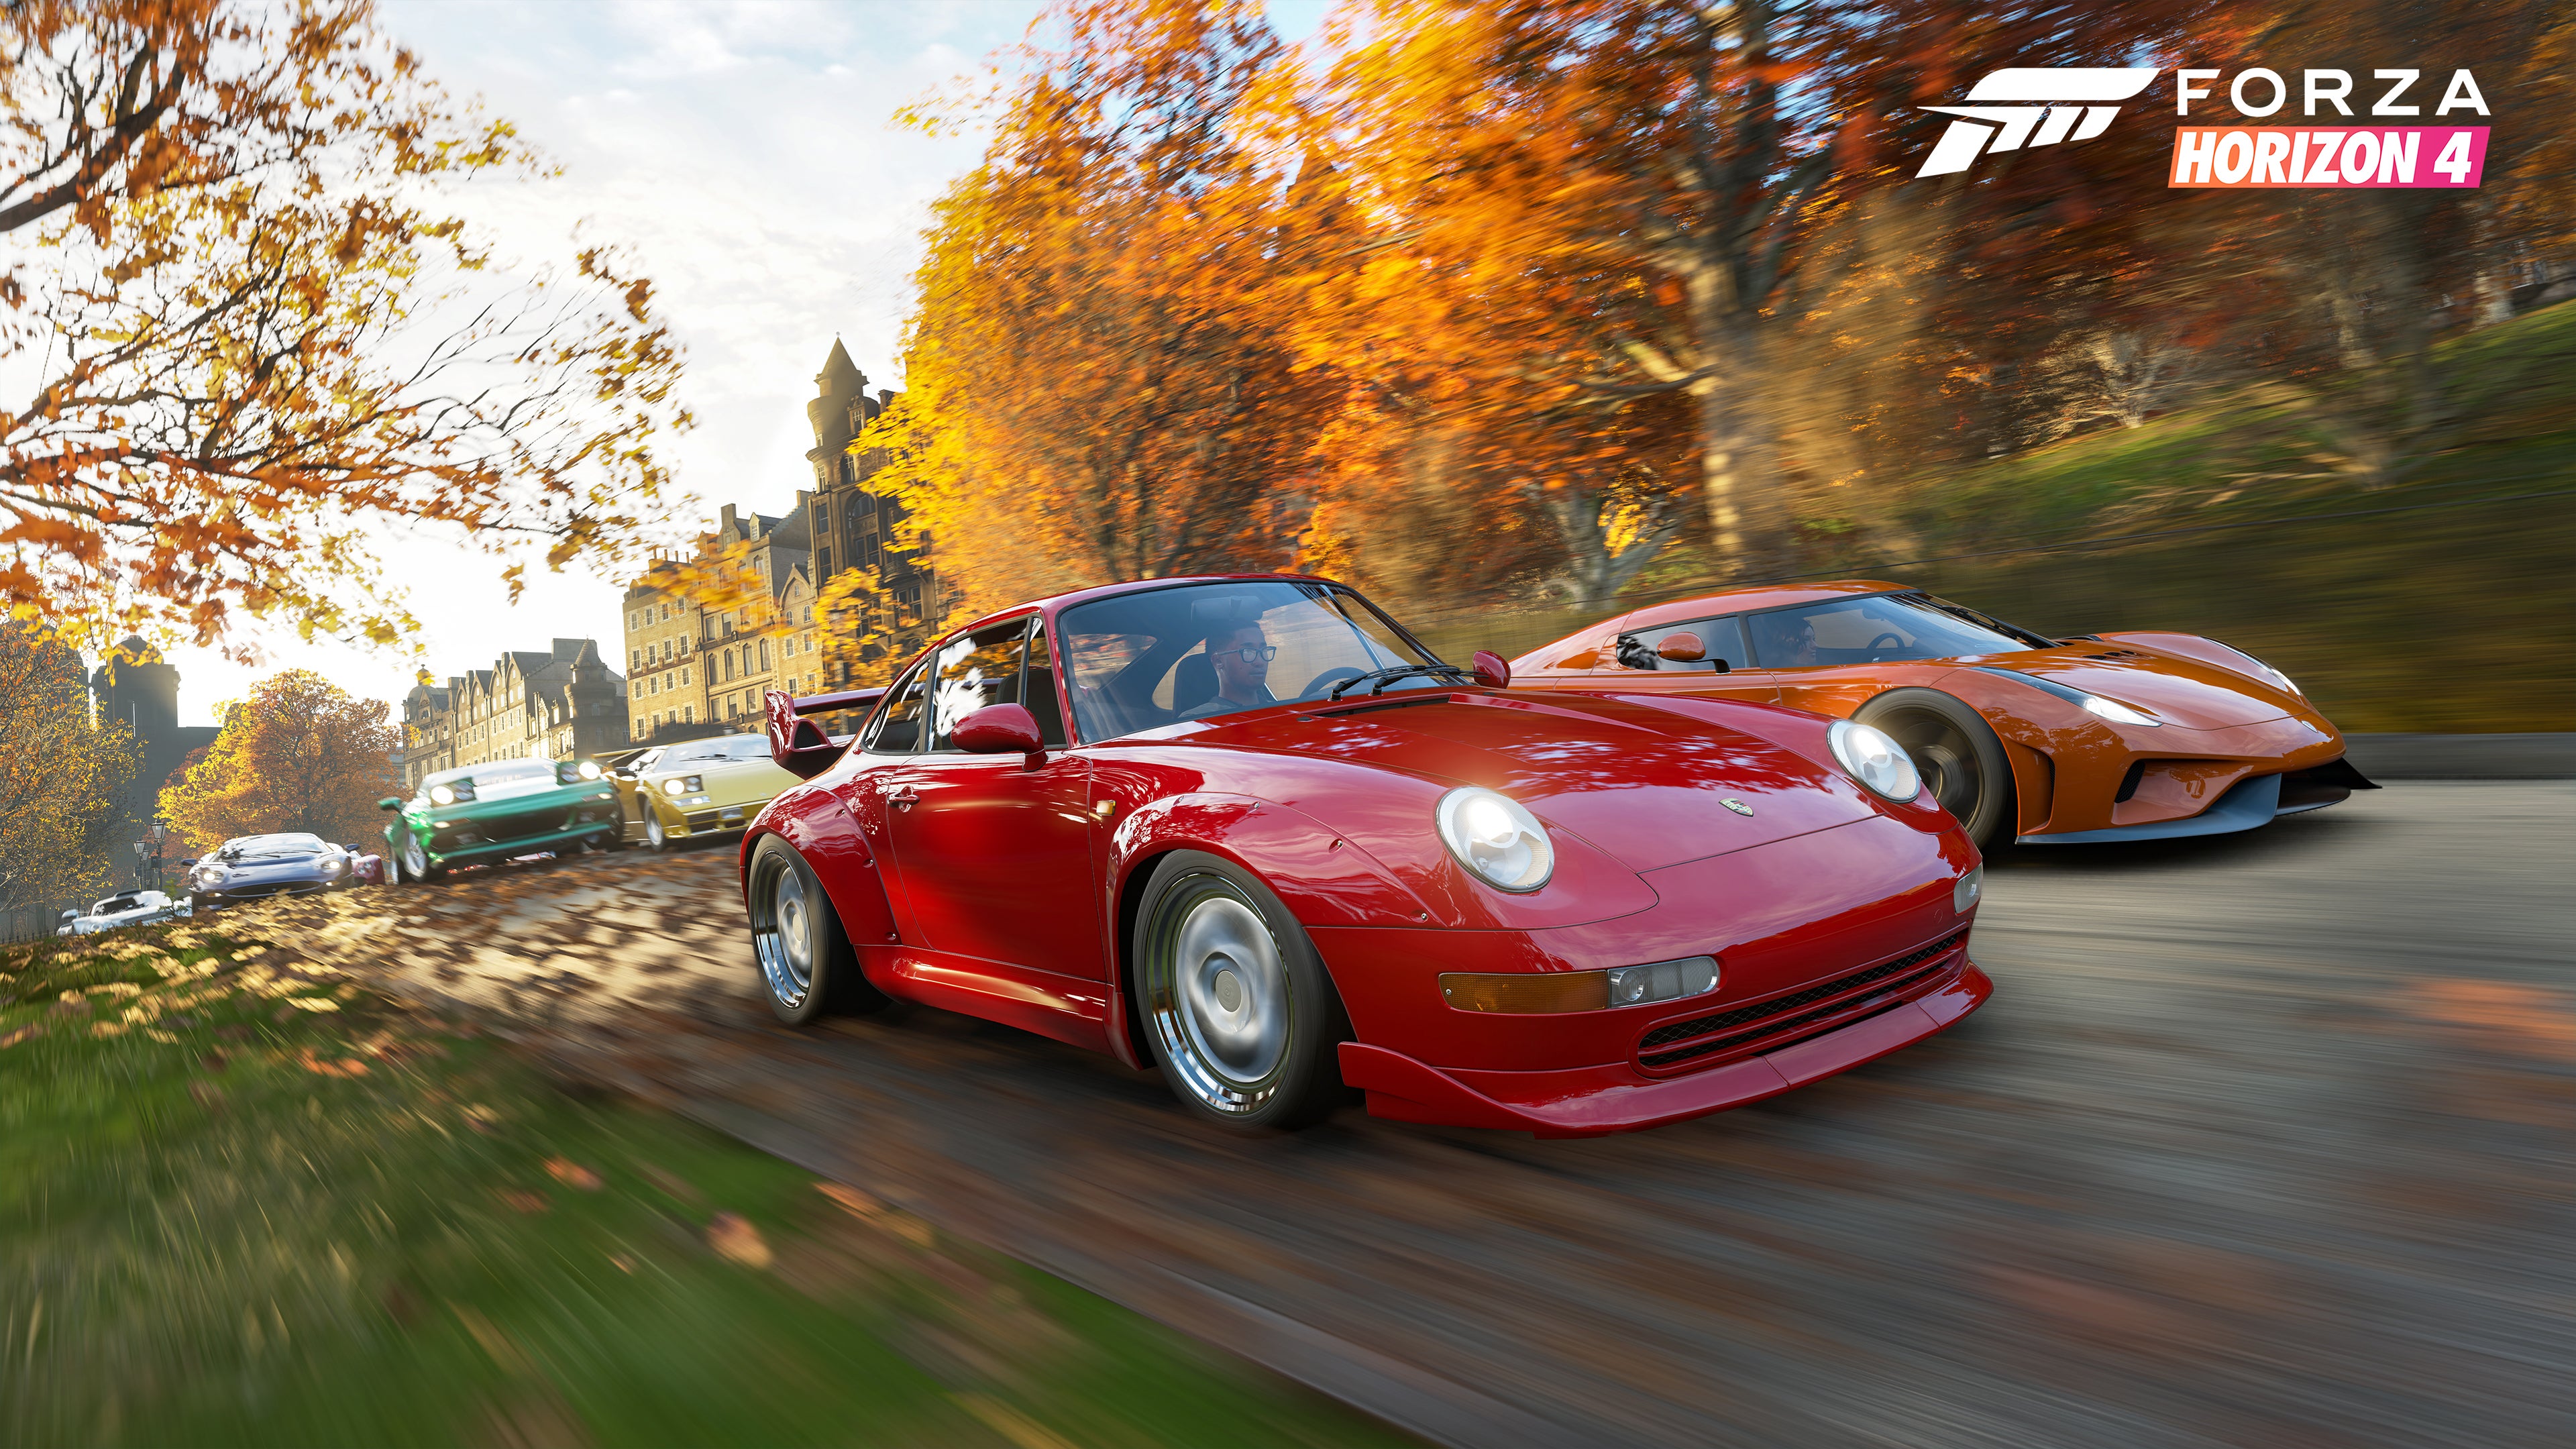 Image for Forza Horizon 4 lets you hit 'Superstar' status purely by creating paint jobs